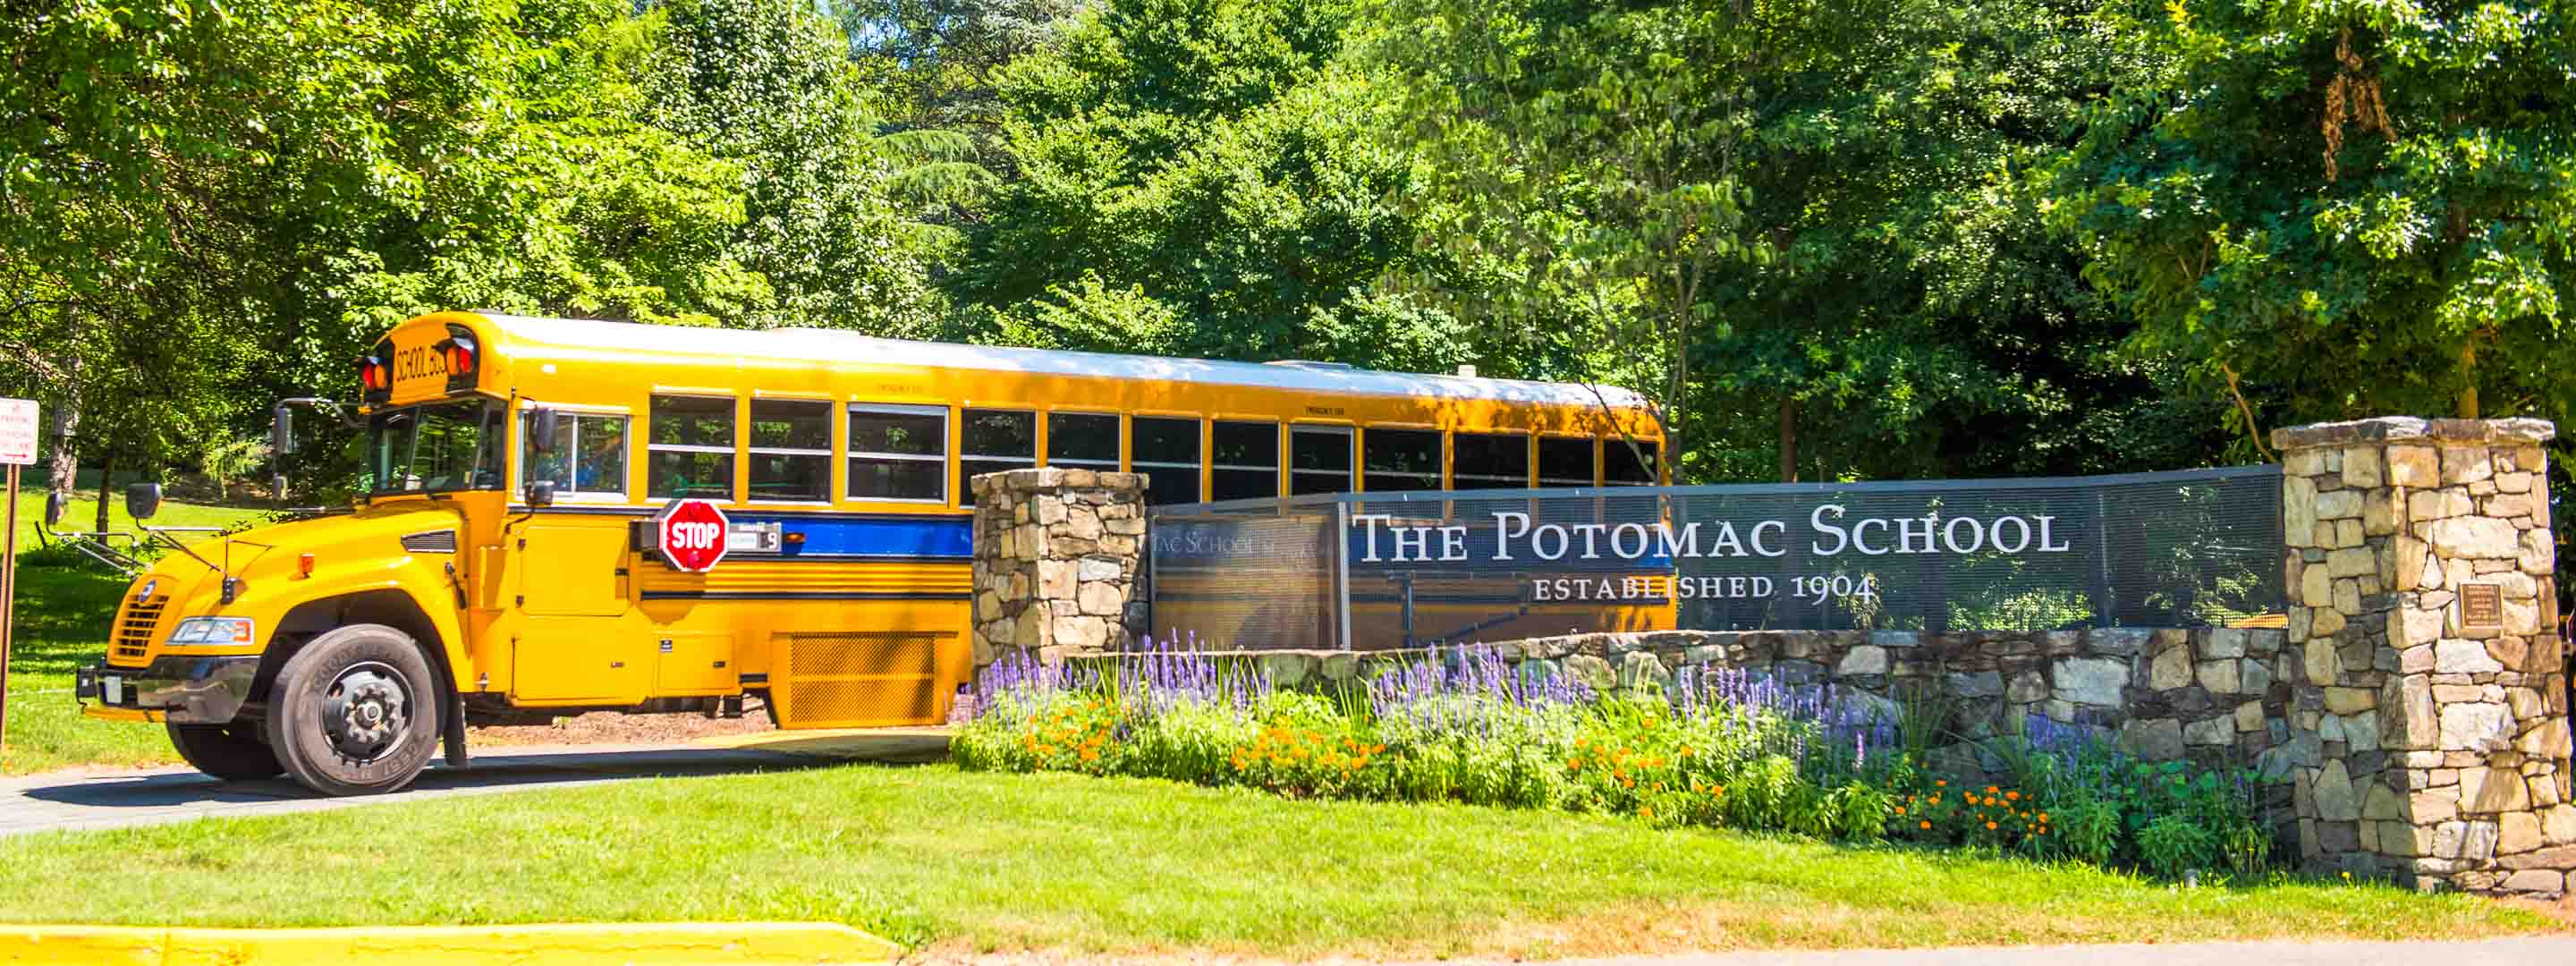 campus-and-location-of-the-potomac-school-summer-potomac